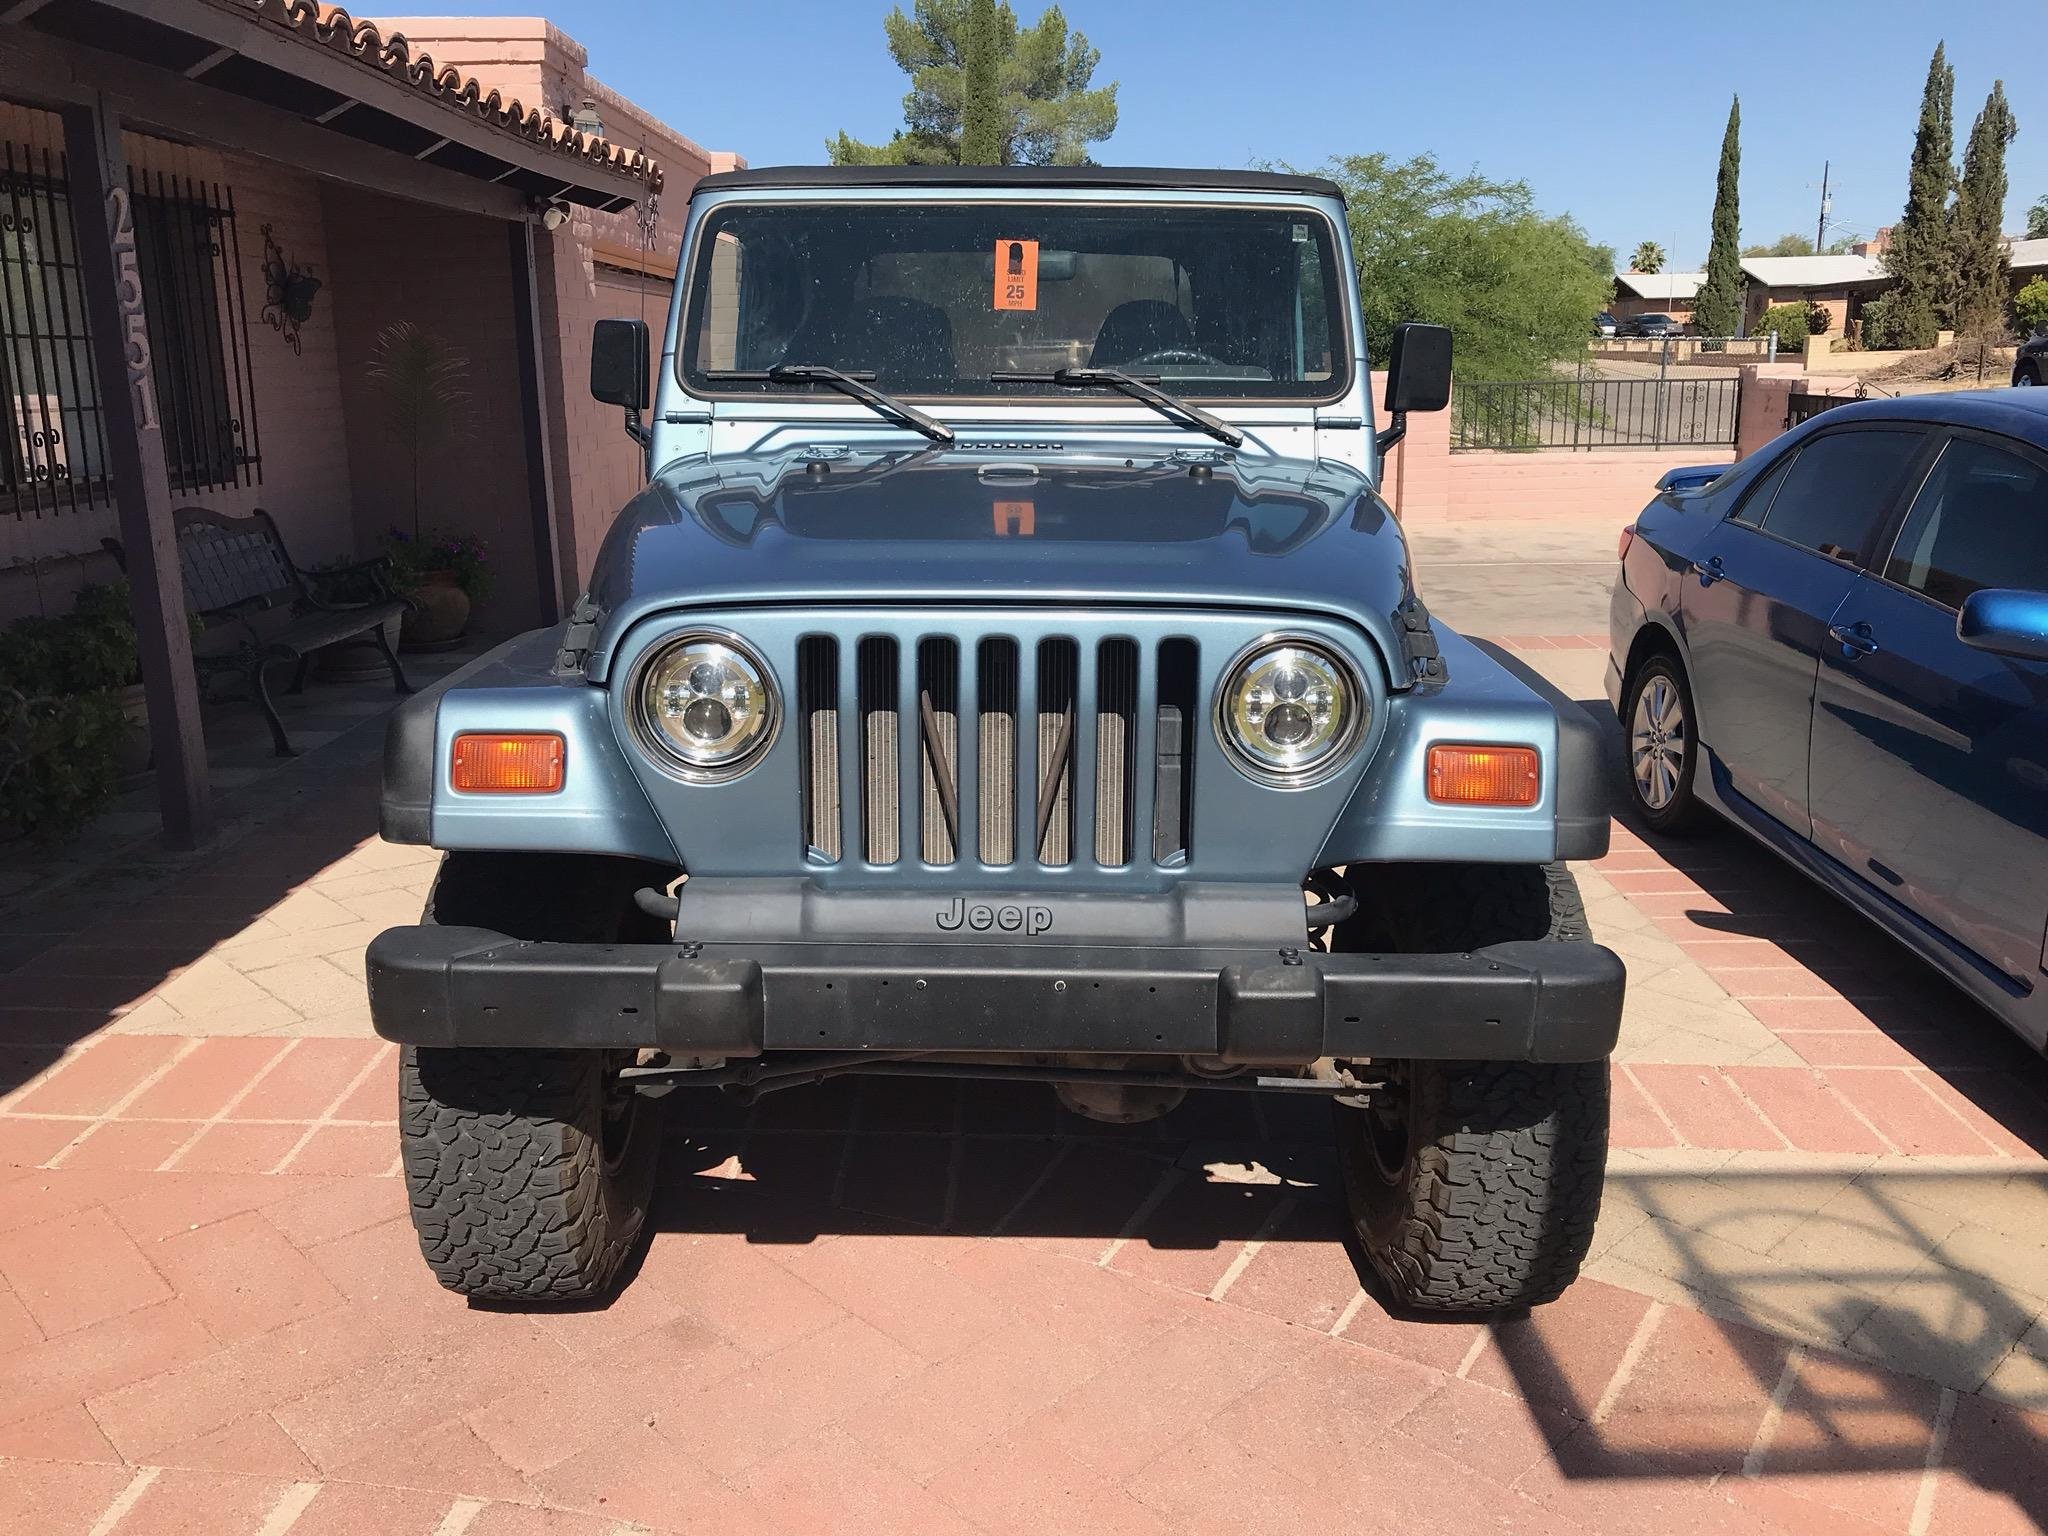 1998 Jeep TJ - Classified Ads  Discussion forum